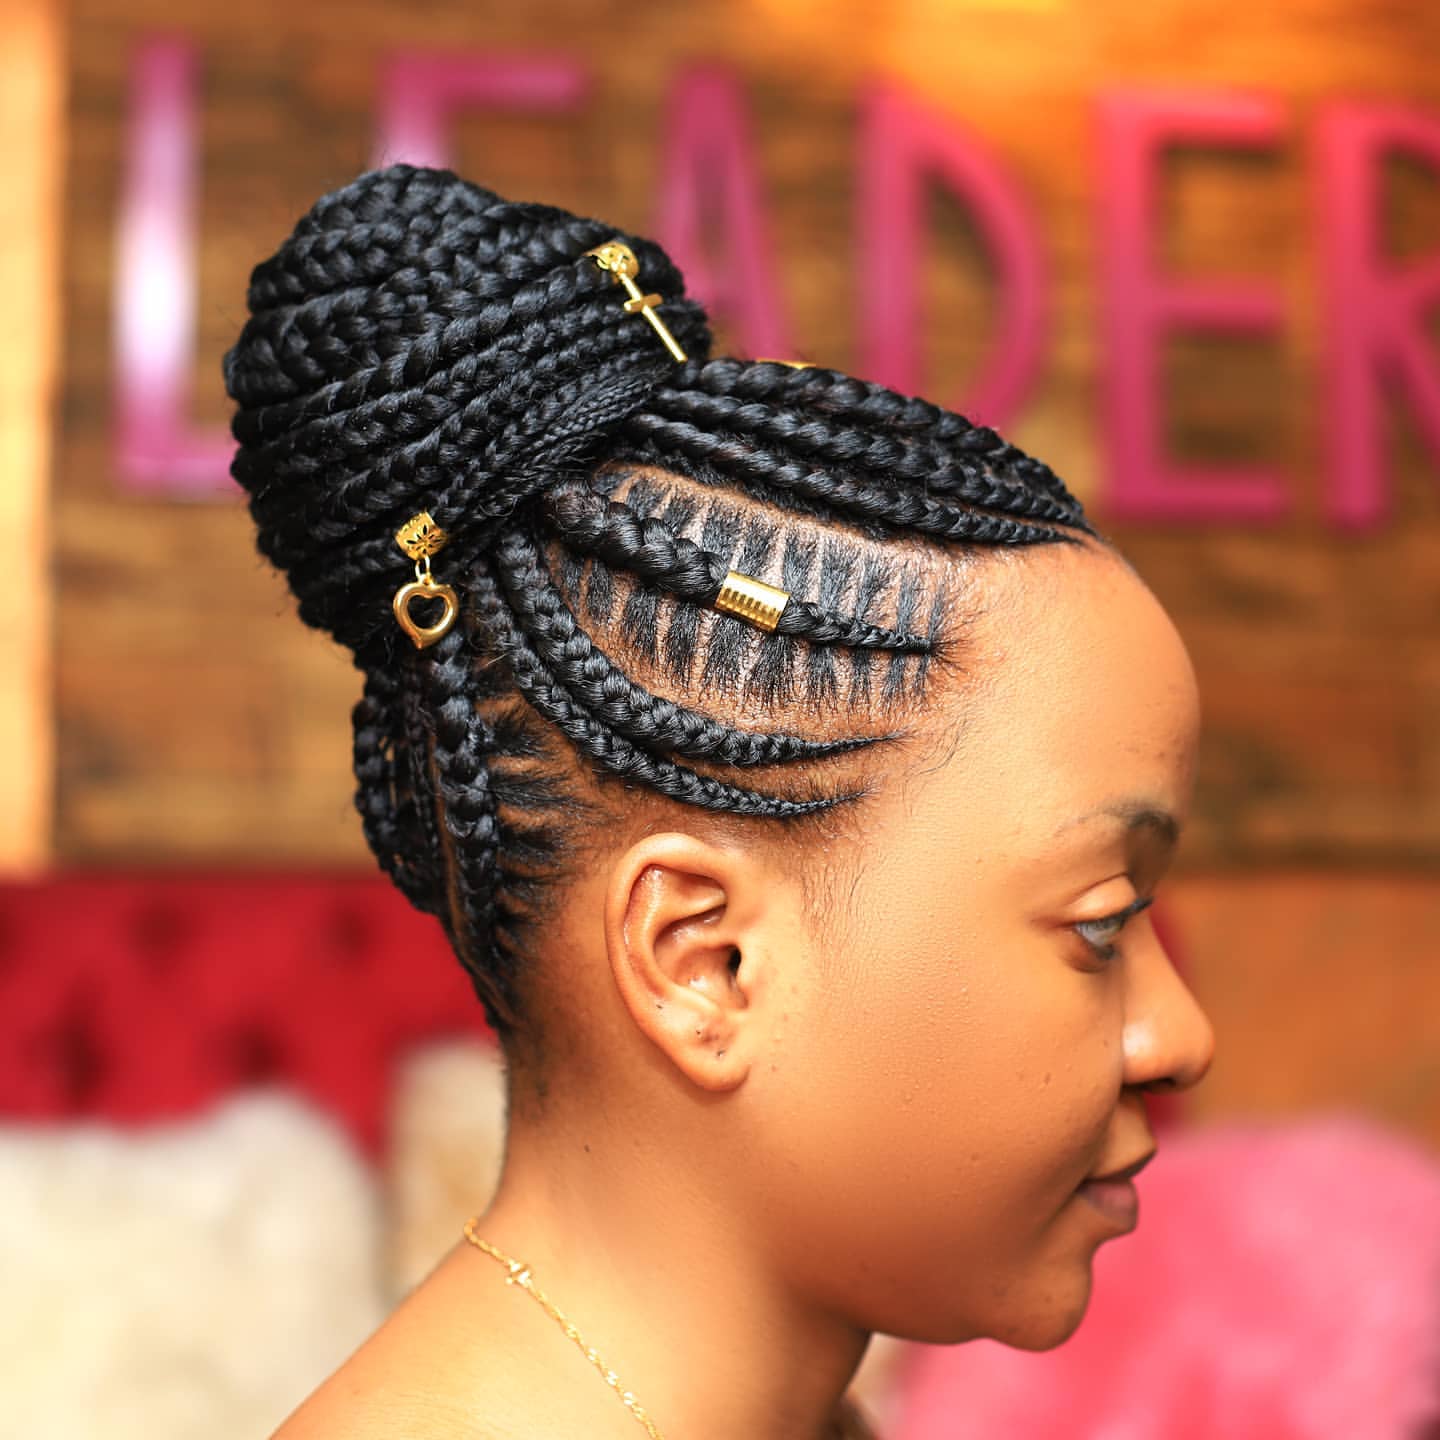 27 Captivating Black Braided Hairstyles for a Chic Appearance